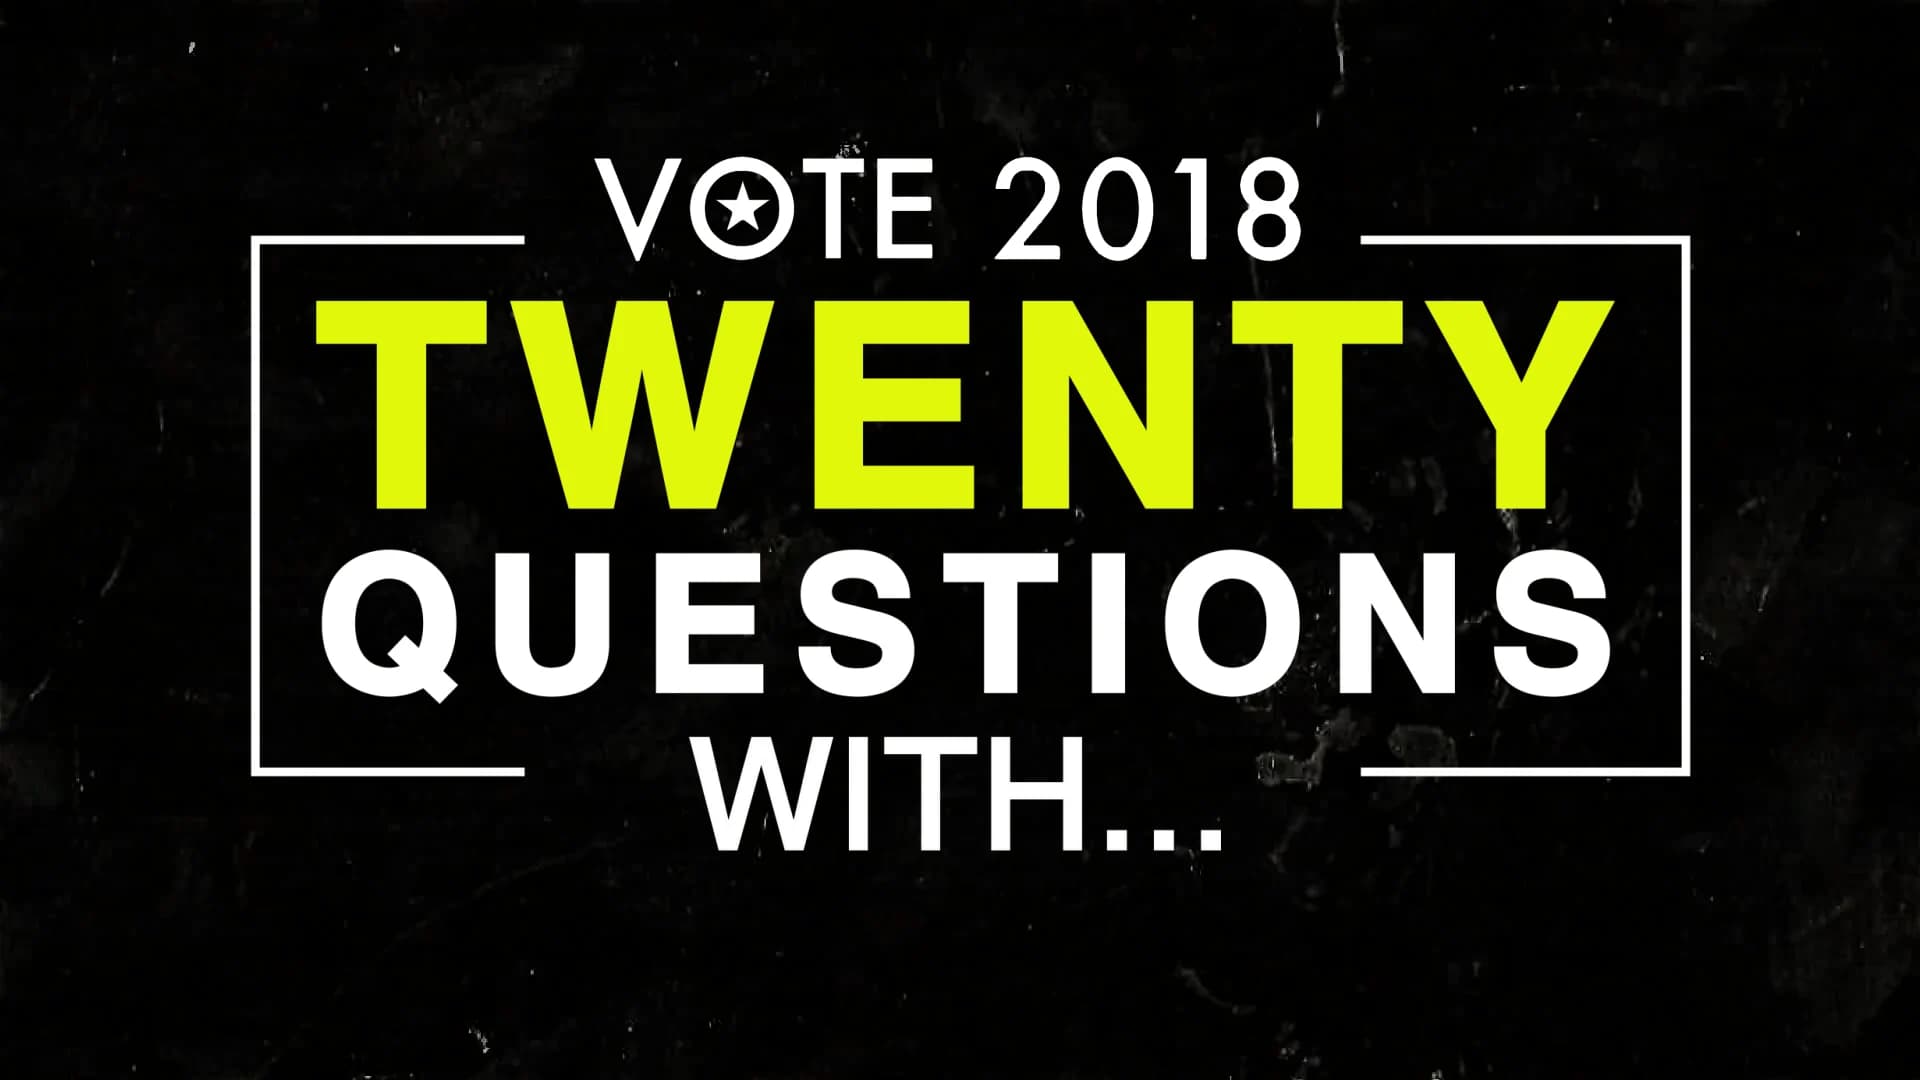 20 Questions with the Candidates